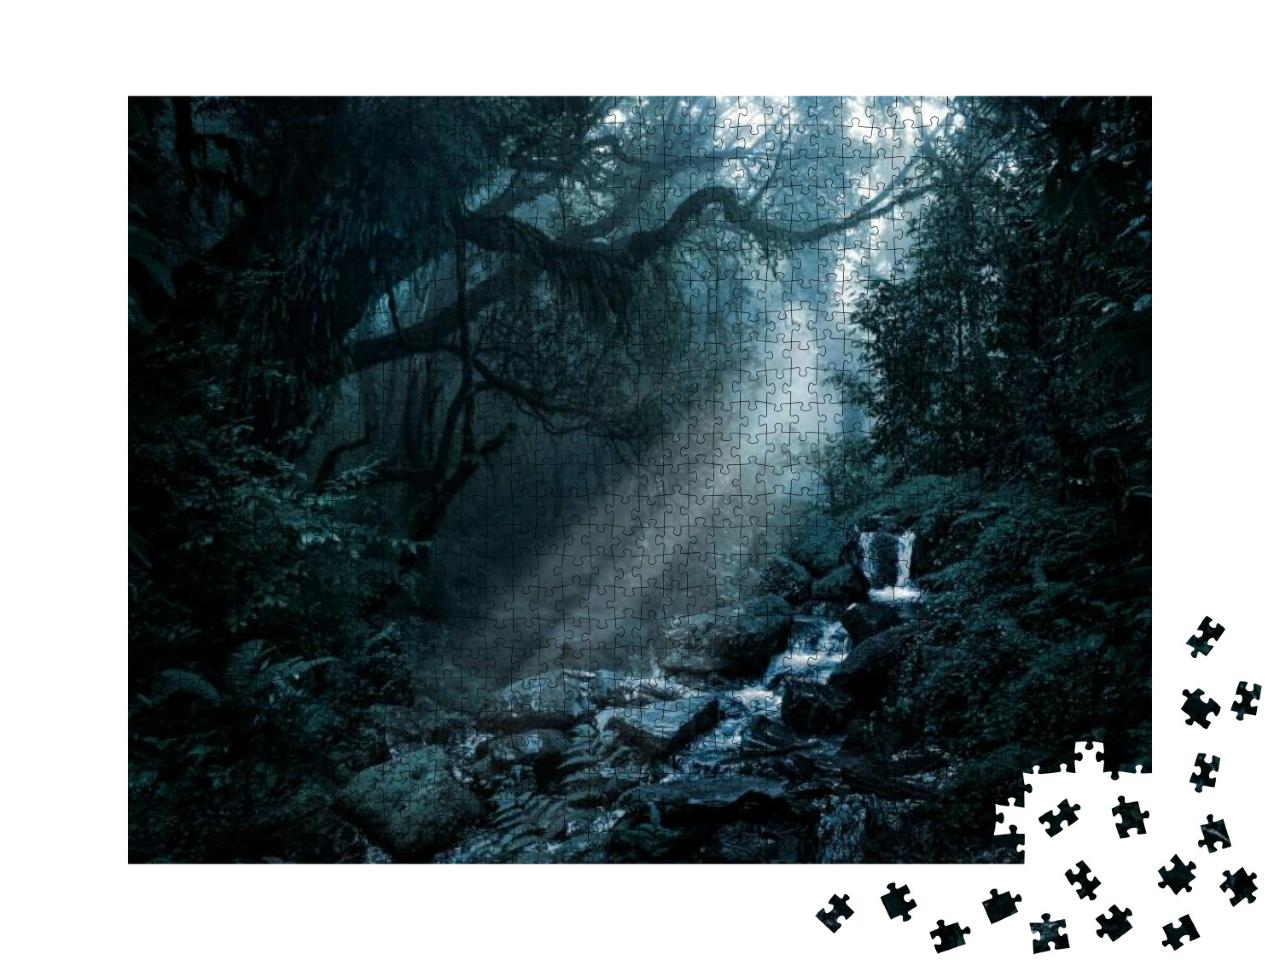 Deep Tropical Jungle in Darkness... Jigsaw Puzzle with 1000 pieces